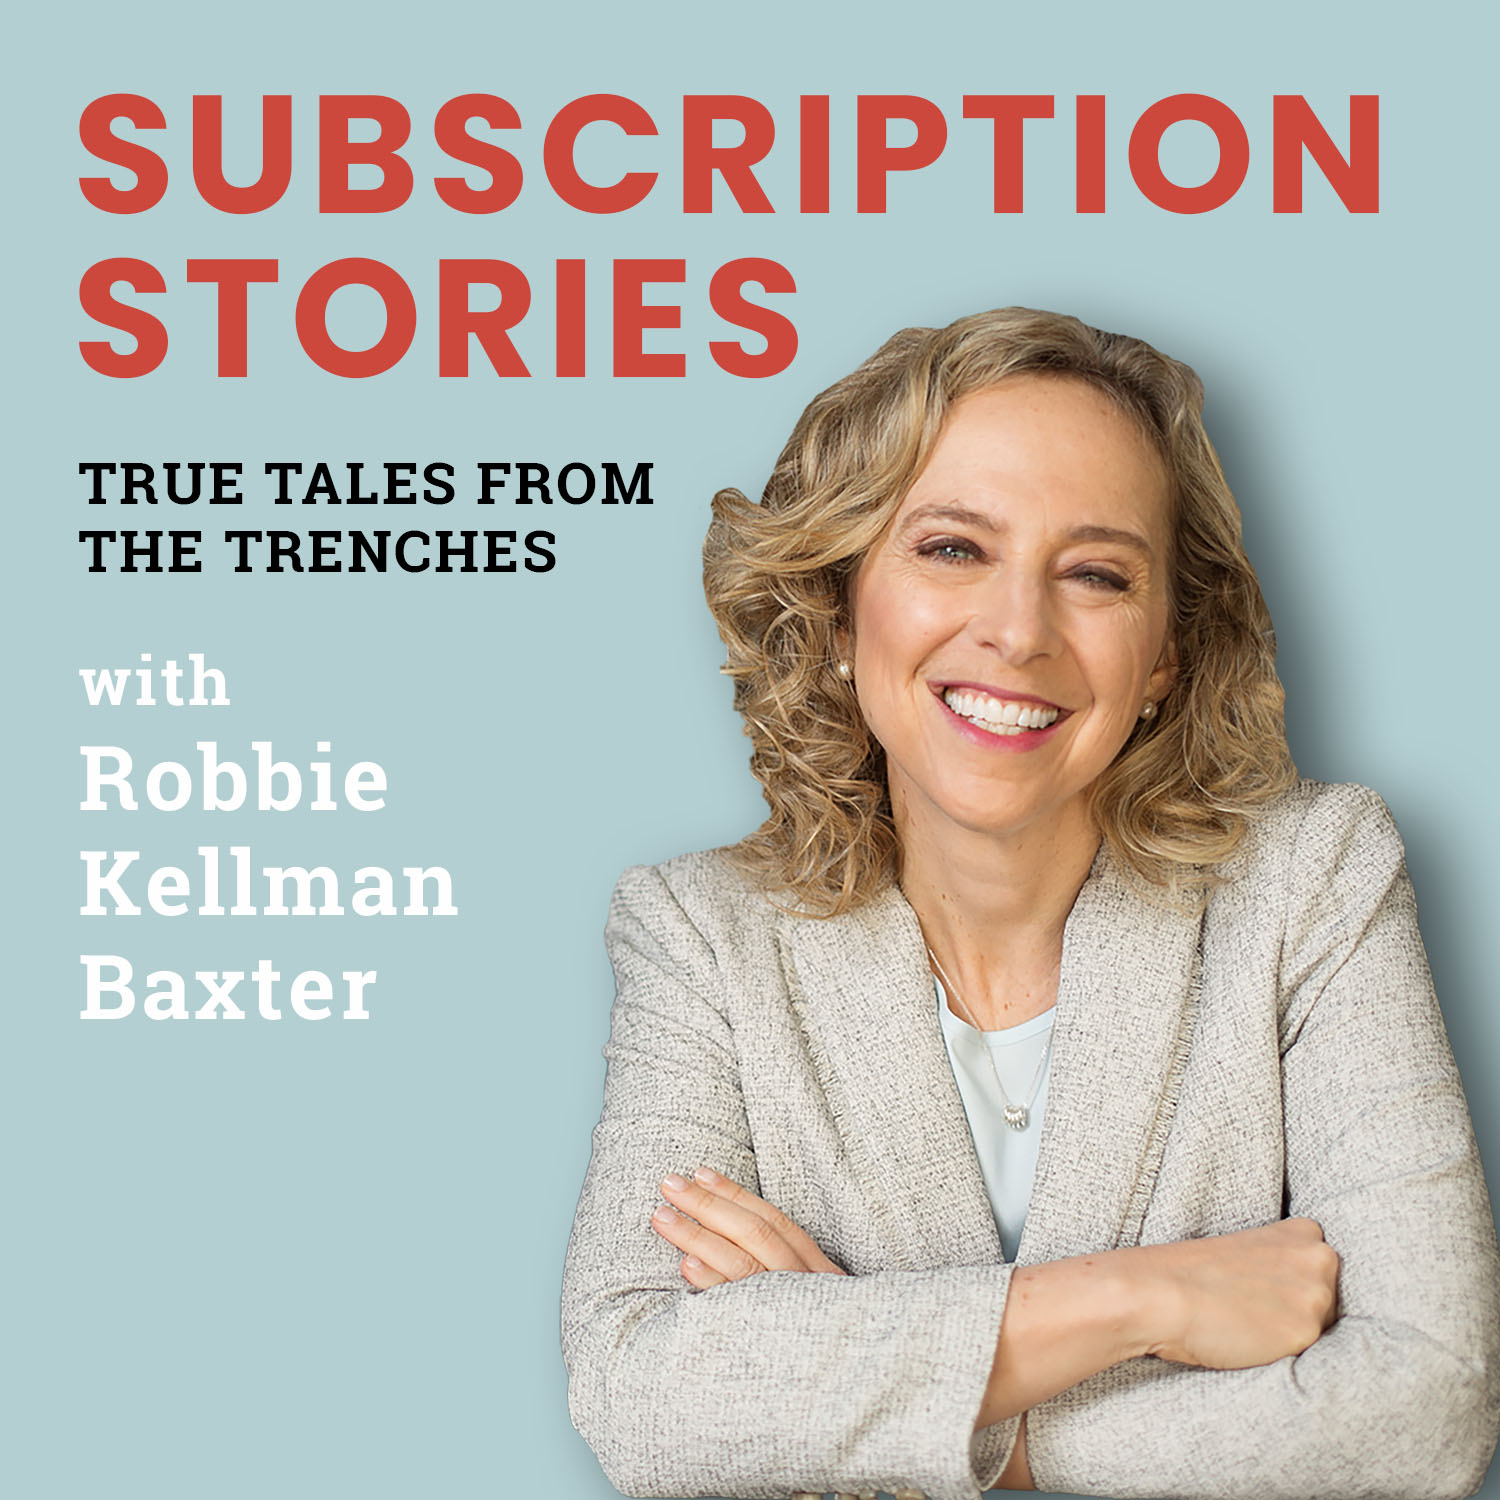 Subscription Models and Innovation with Columbia’s Rita McGrath